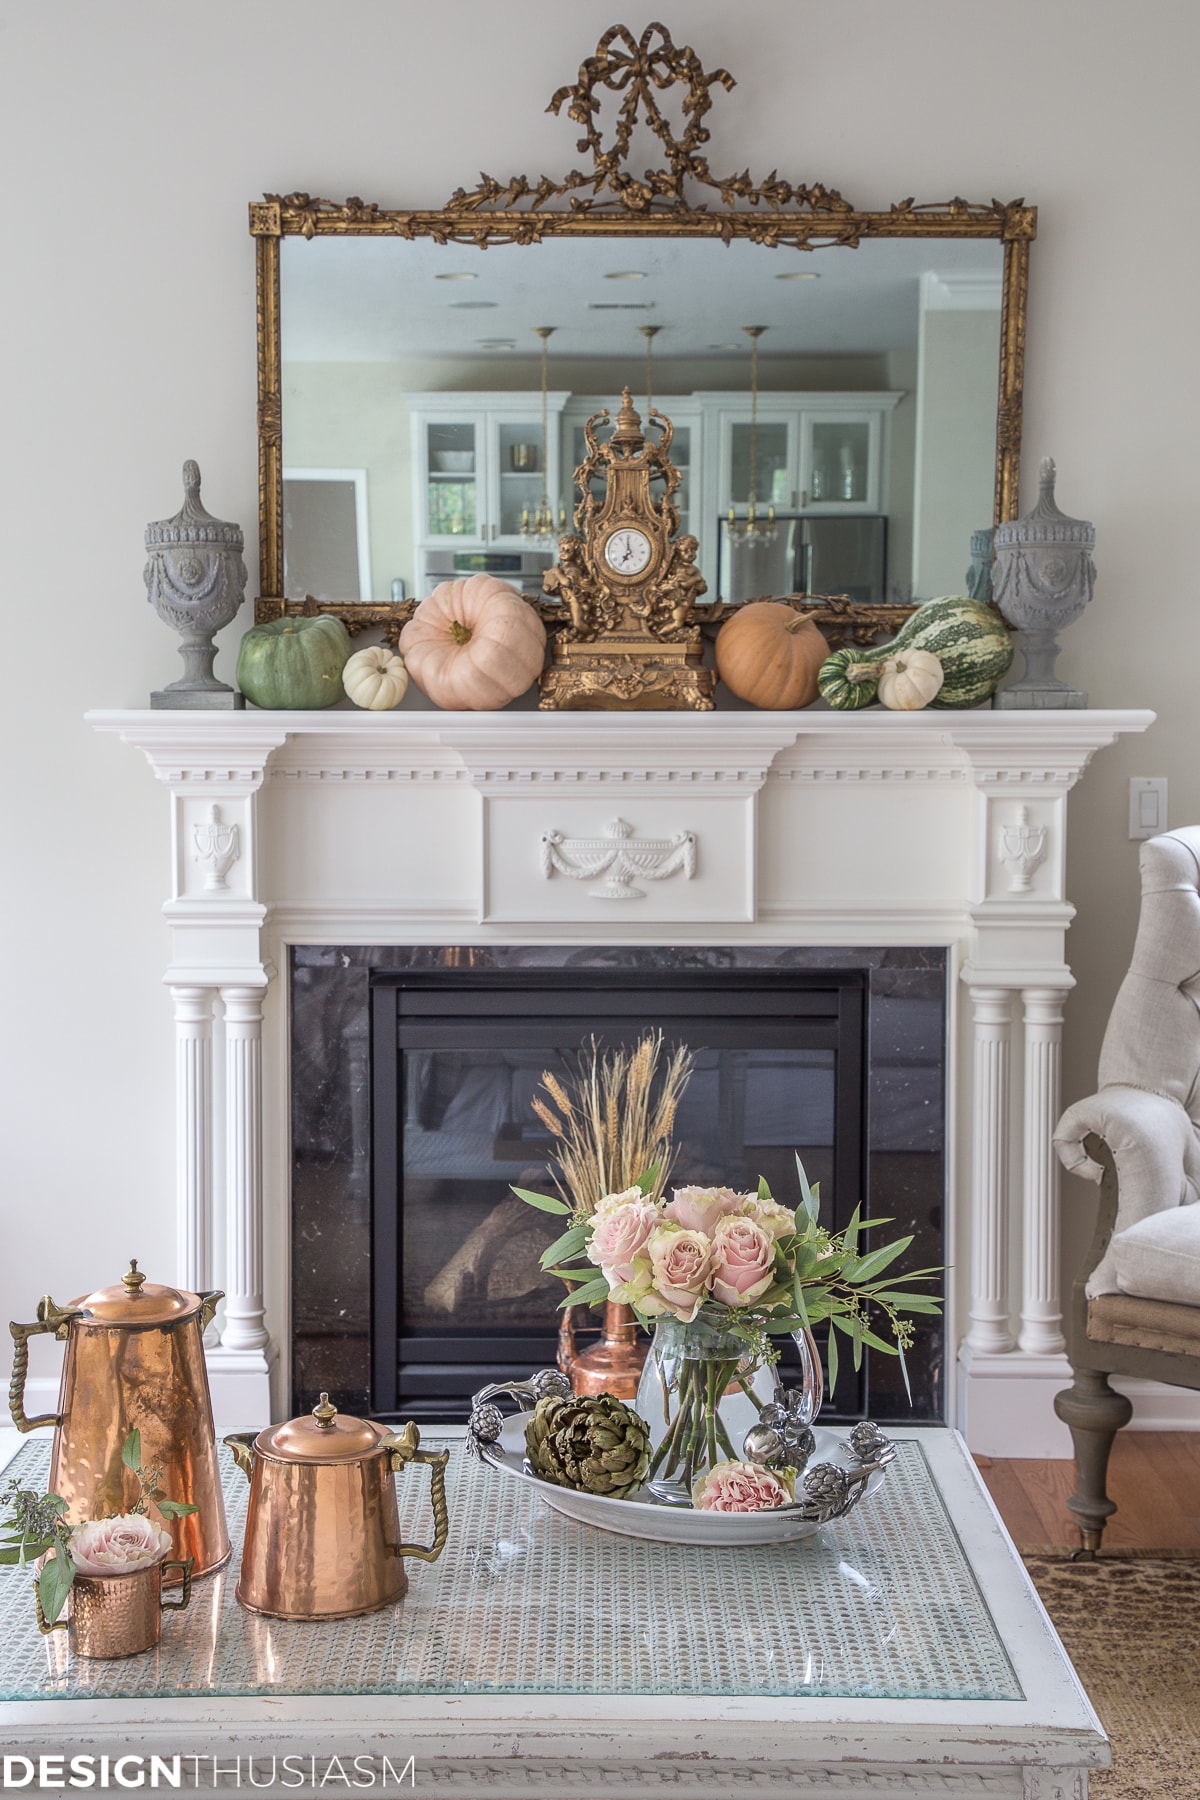 White fireplace with pumpkins on the mantel and an ornate mirror above it.